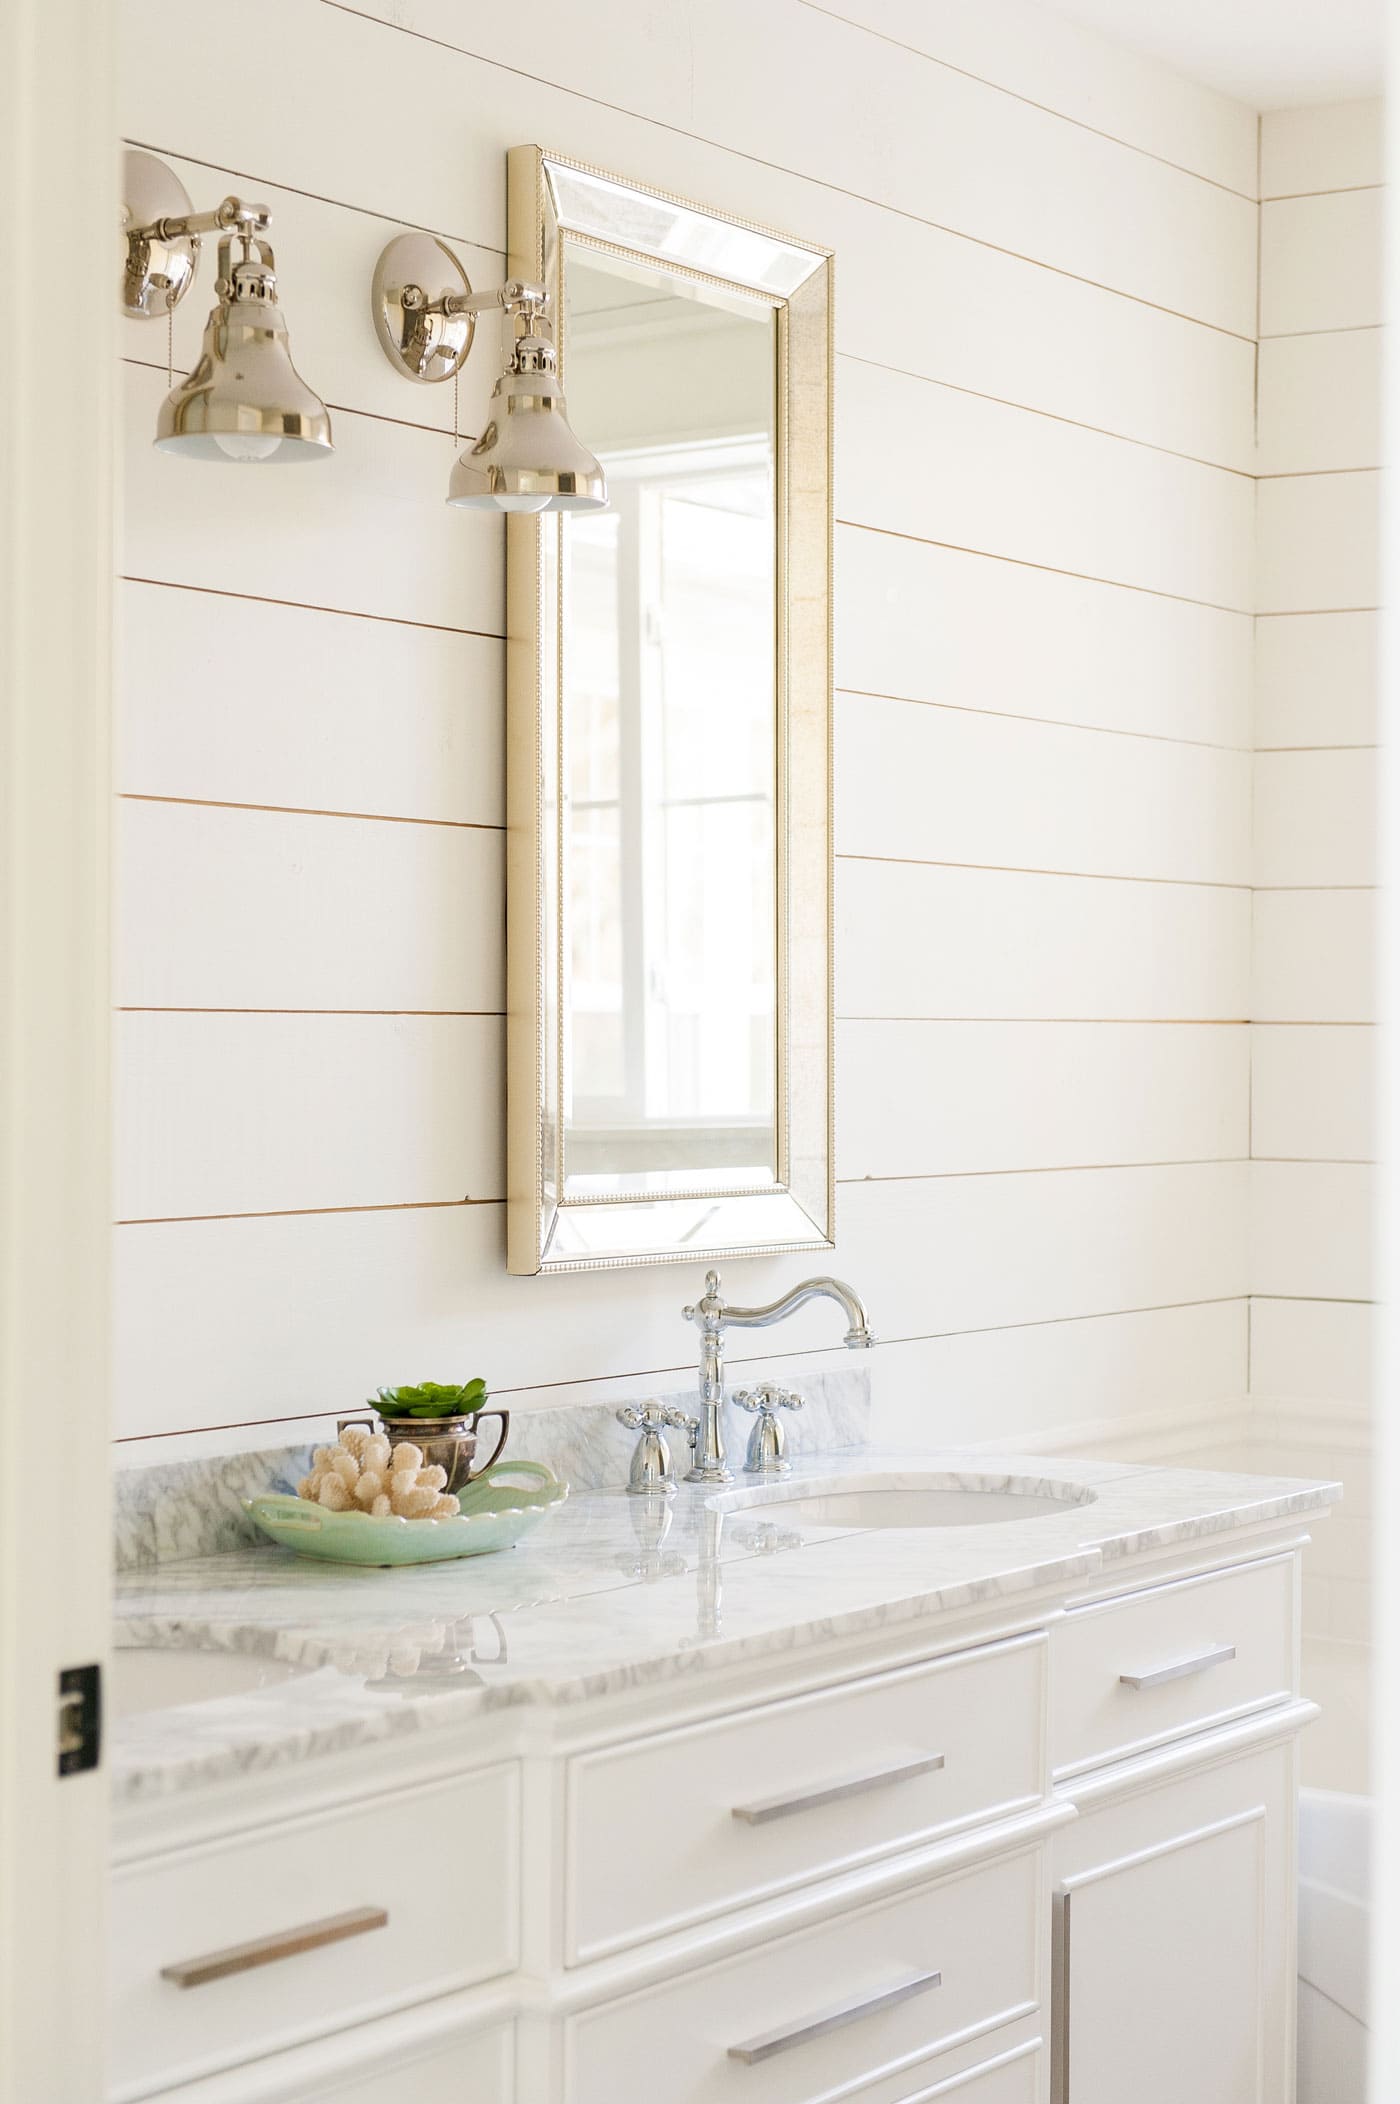 Shiplap walls in a bathroom painted Alabaster white.